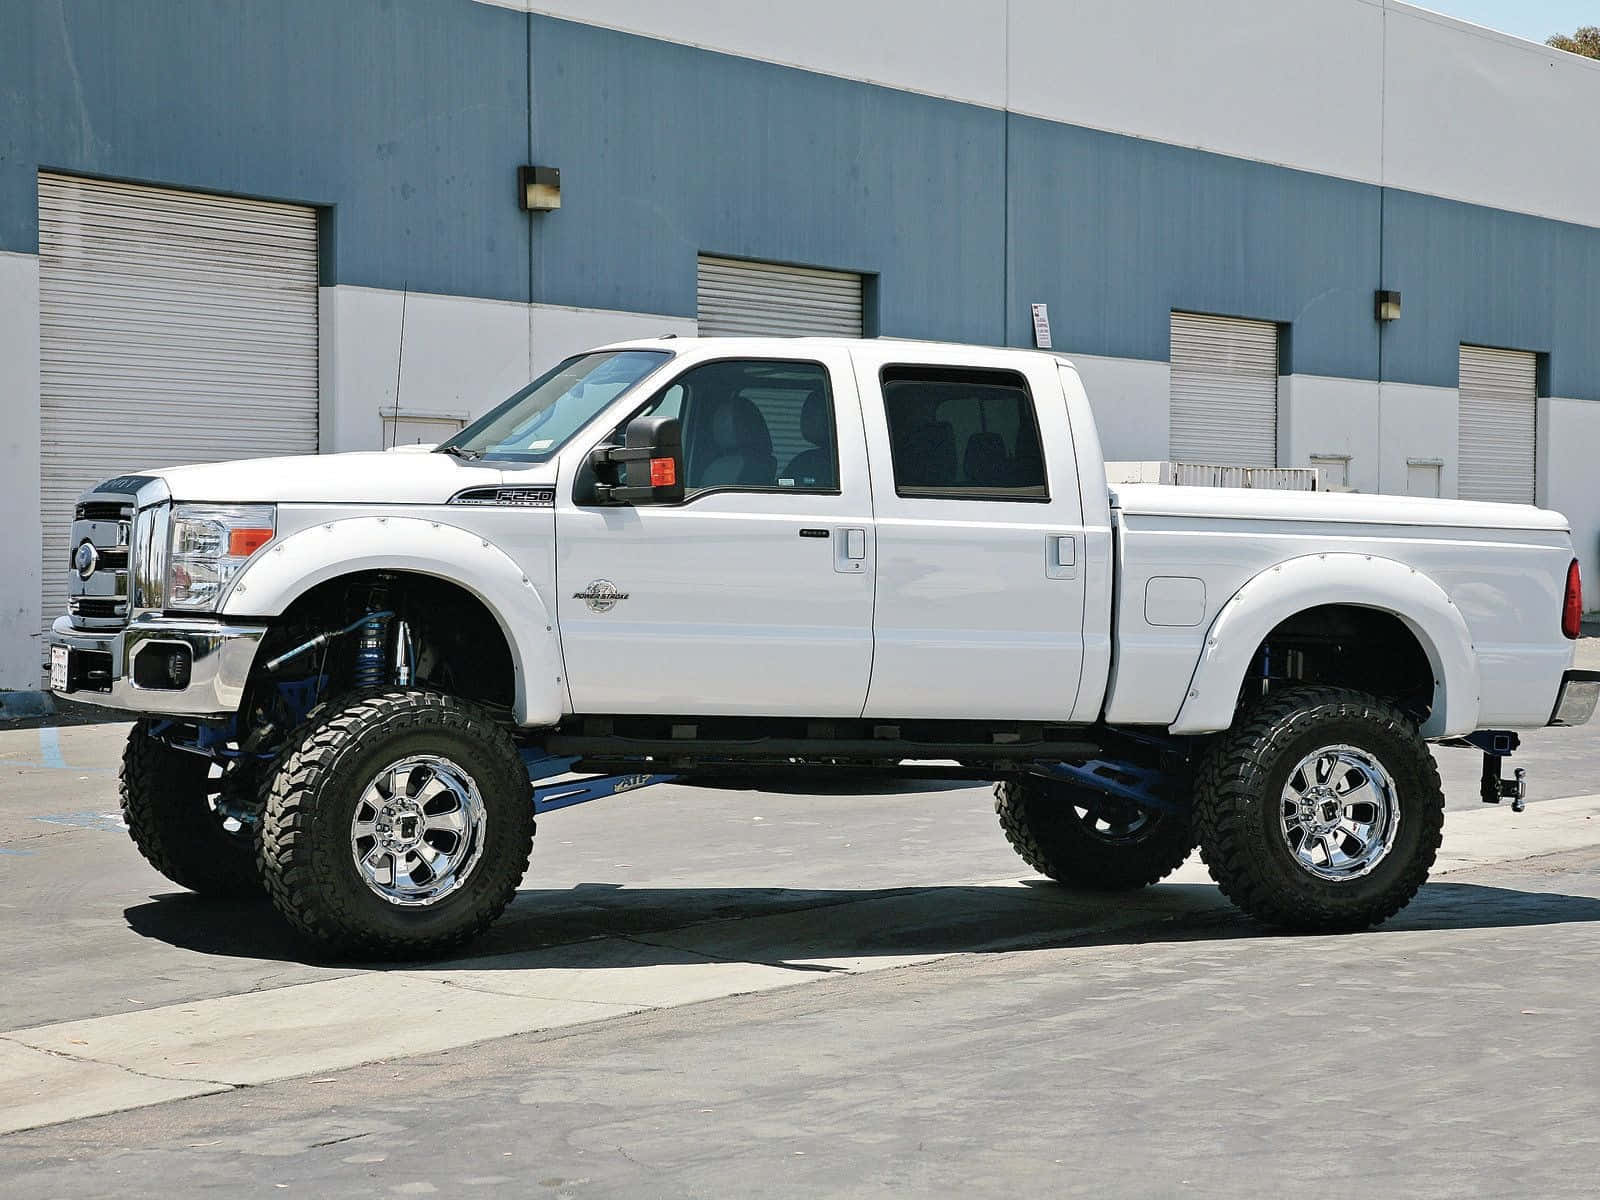 A White Ford F-250 Lifted Truck Parked In Front Of A Building Wallpaper